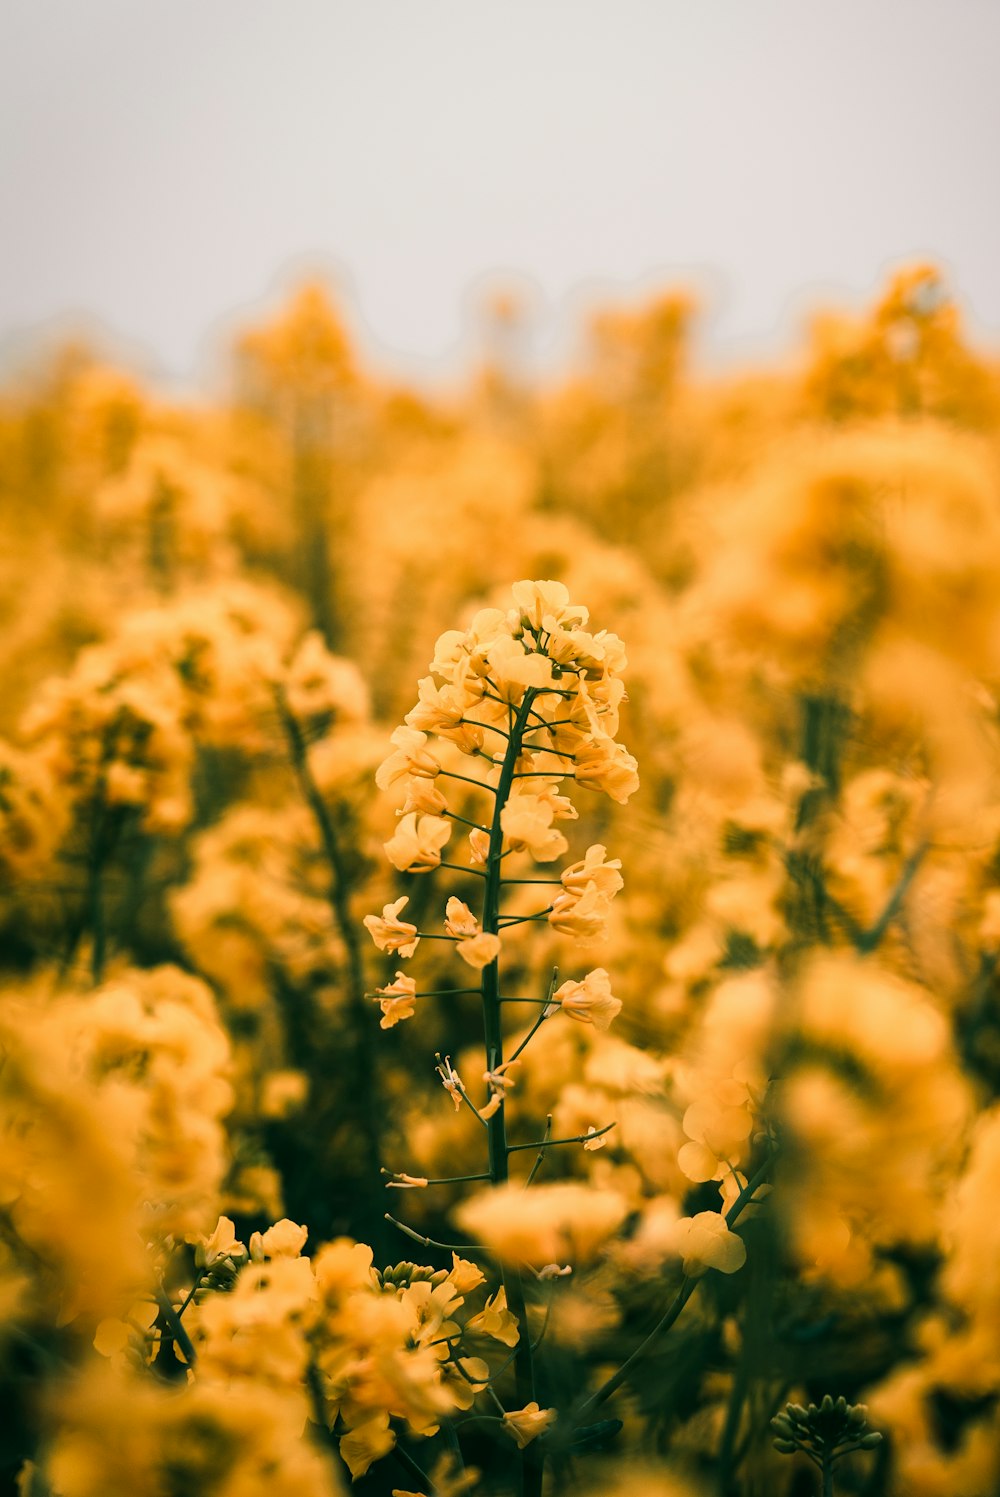 yellow clustered flowers in soft focus photography